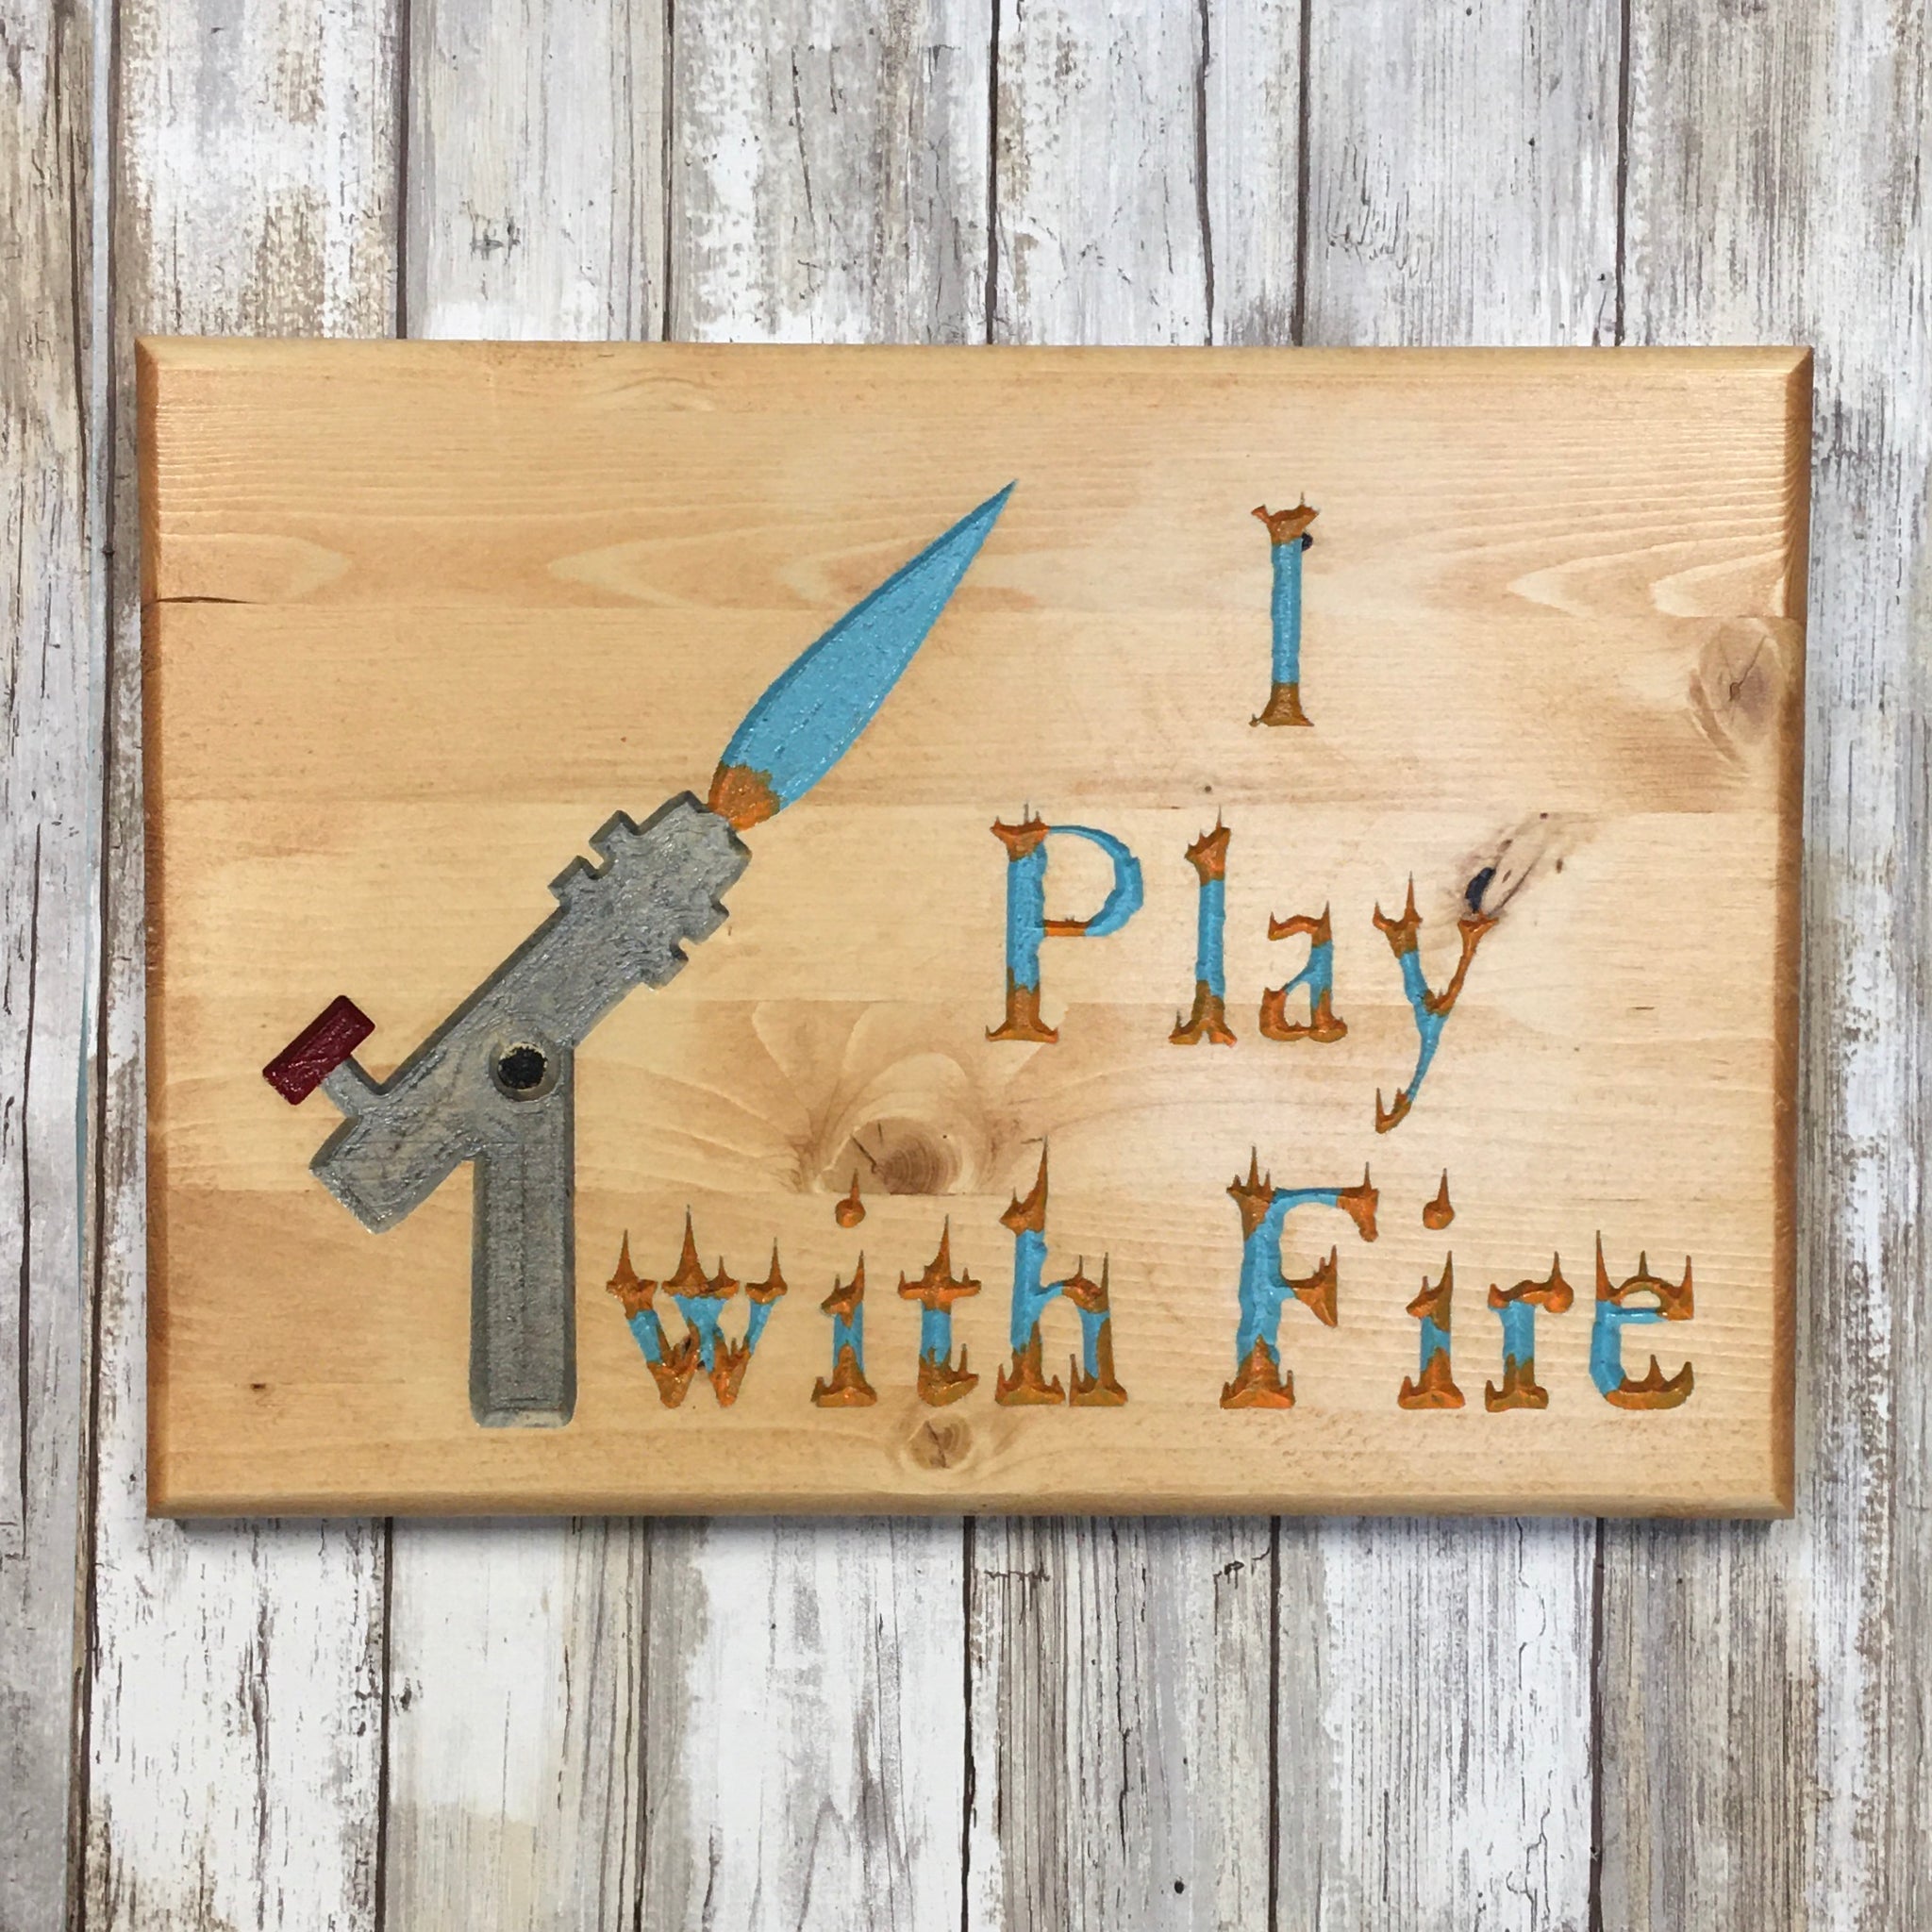 I Play With Fire - Lampworker Studio Sign  - Carved & Painted Pine Wood